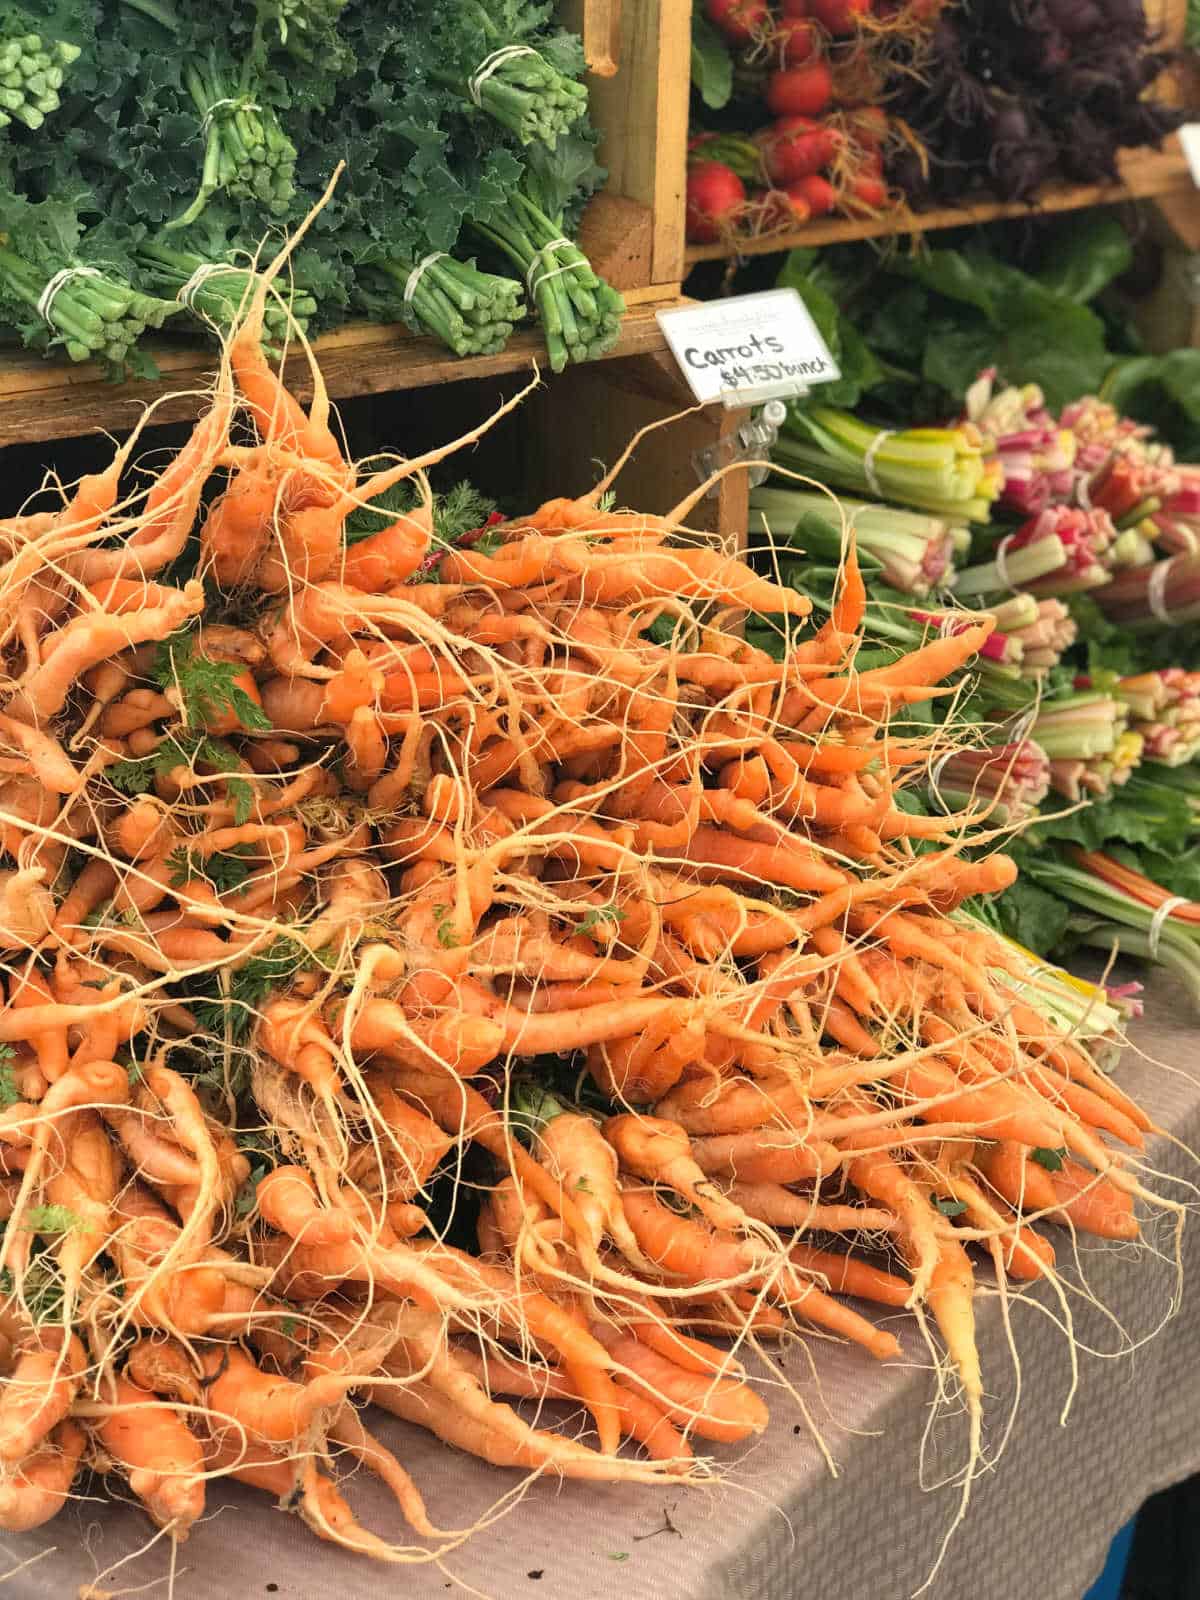 Bunch of carrots on table at farmers market with more vegetables in background.